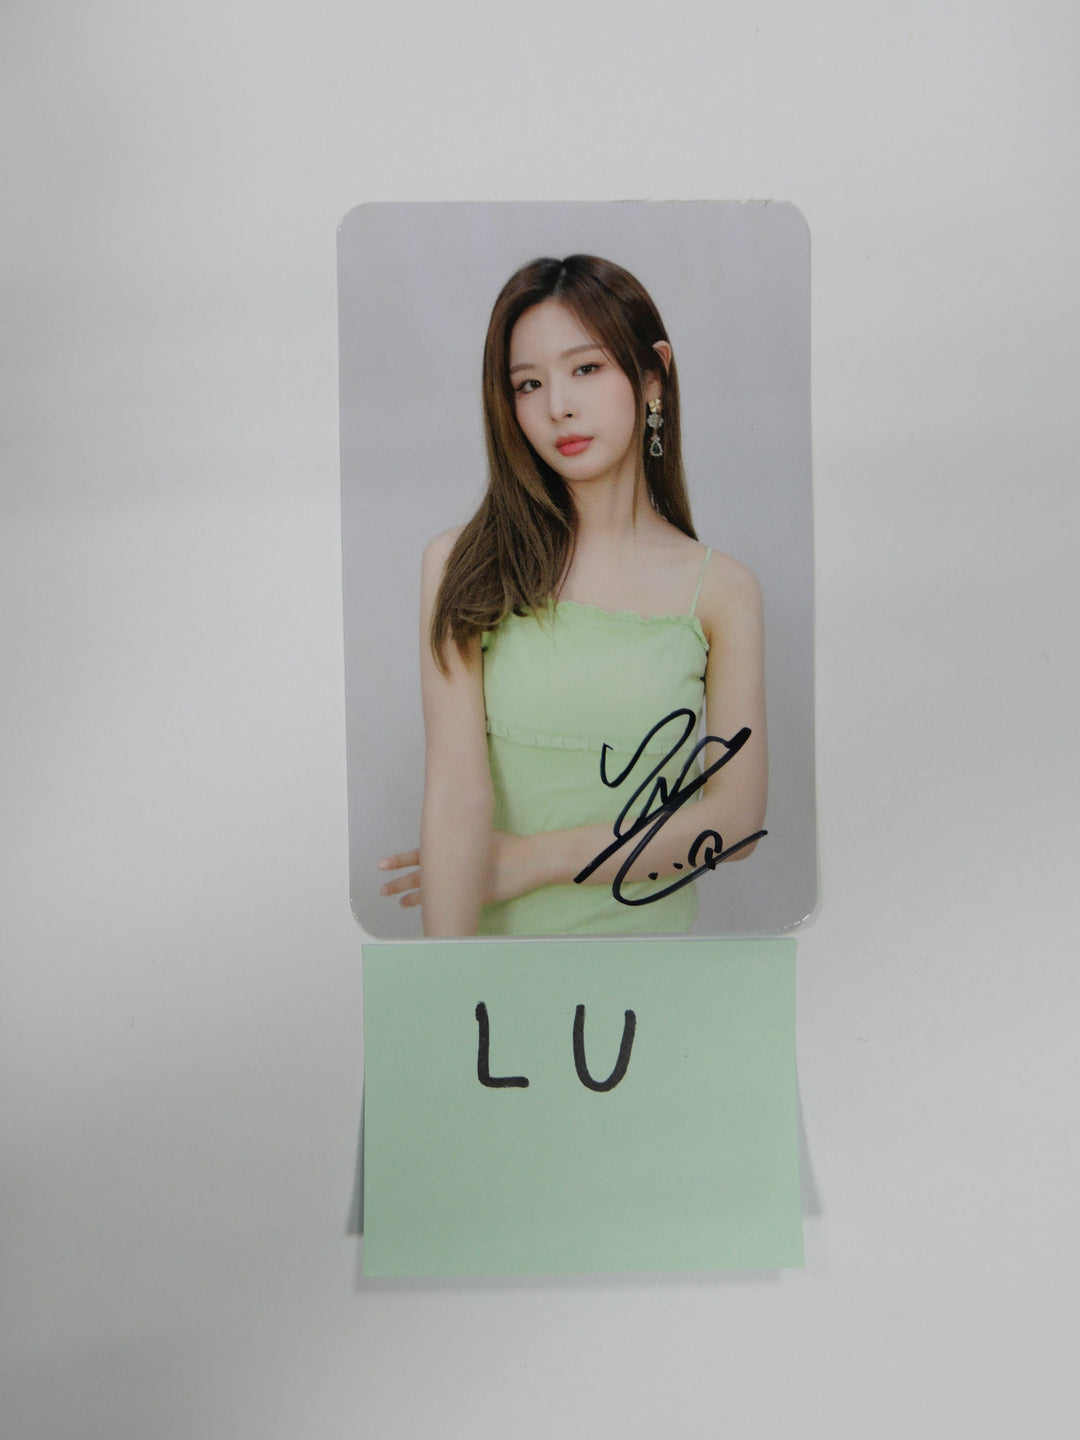 Nature 3rd Anniversary Fan Event - Hand Autographed(Signed) Photocard